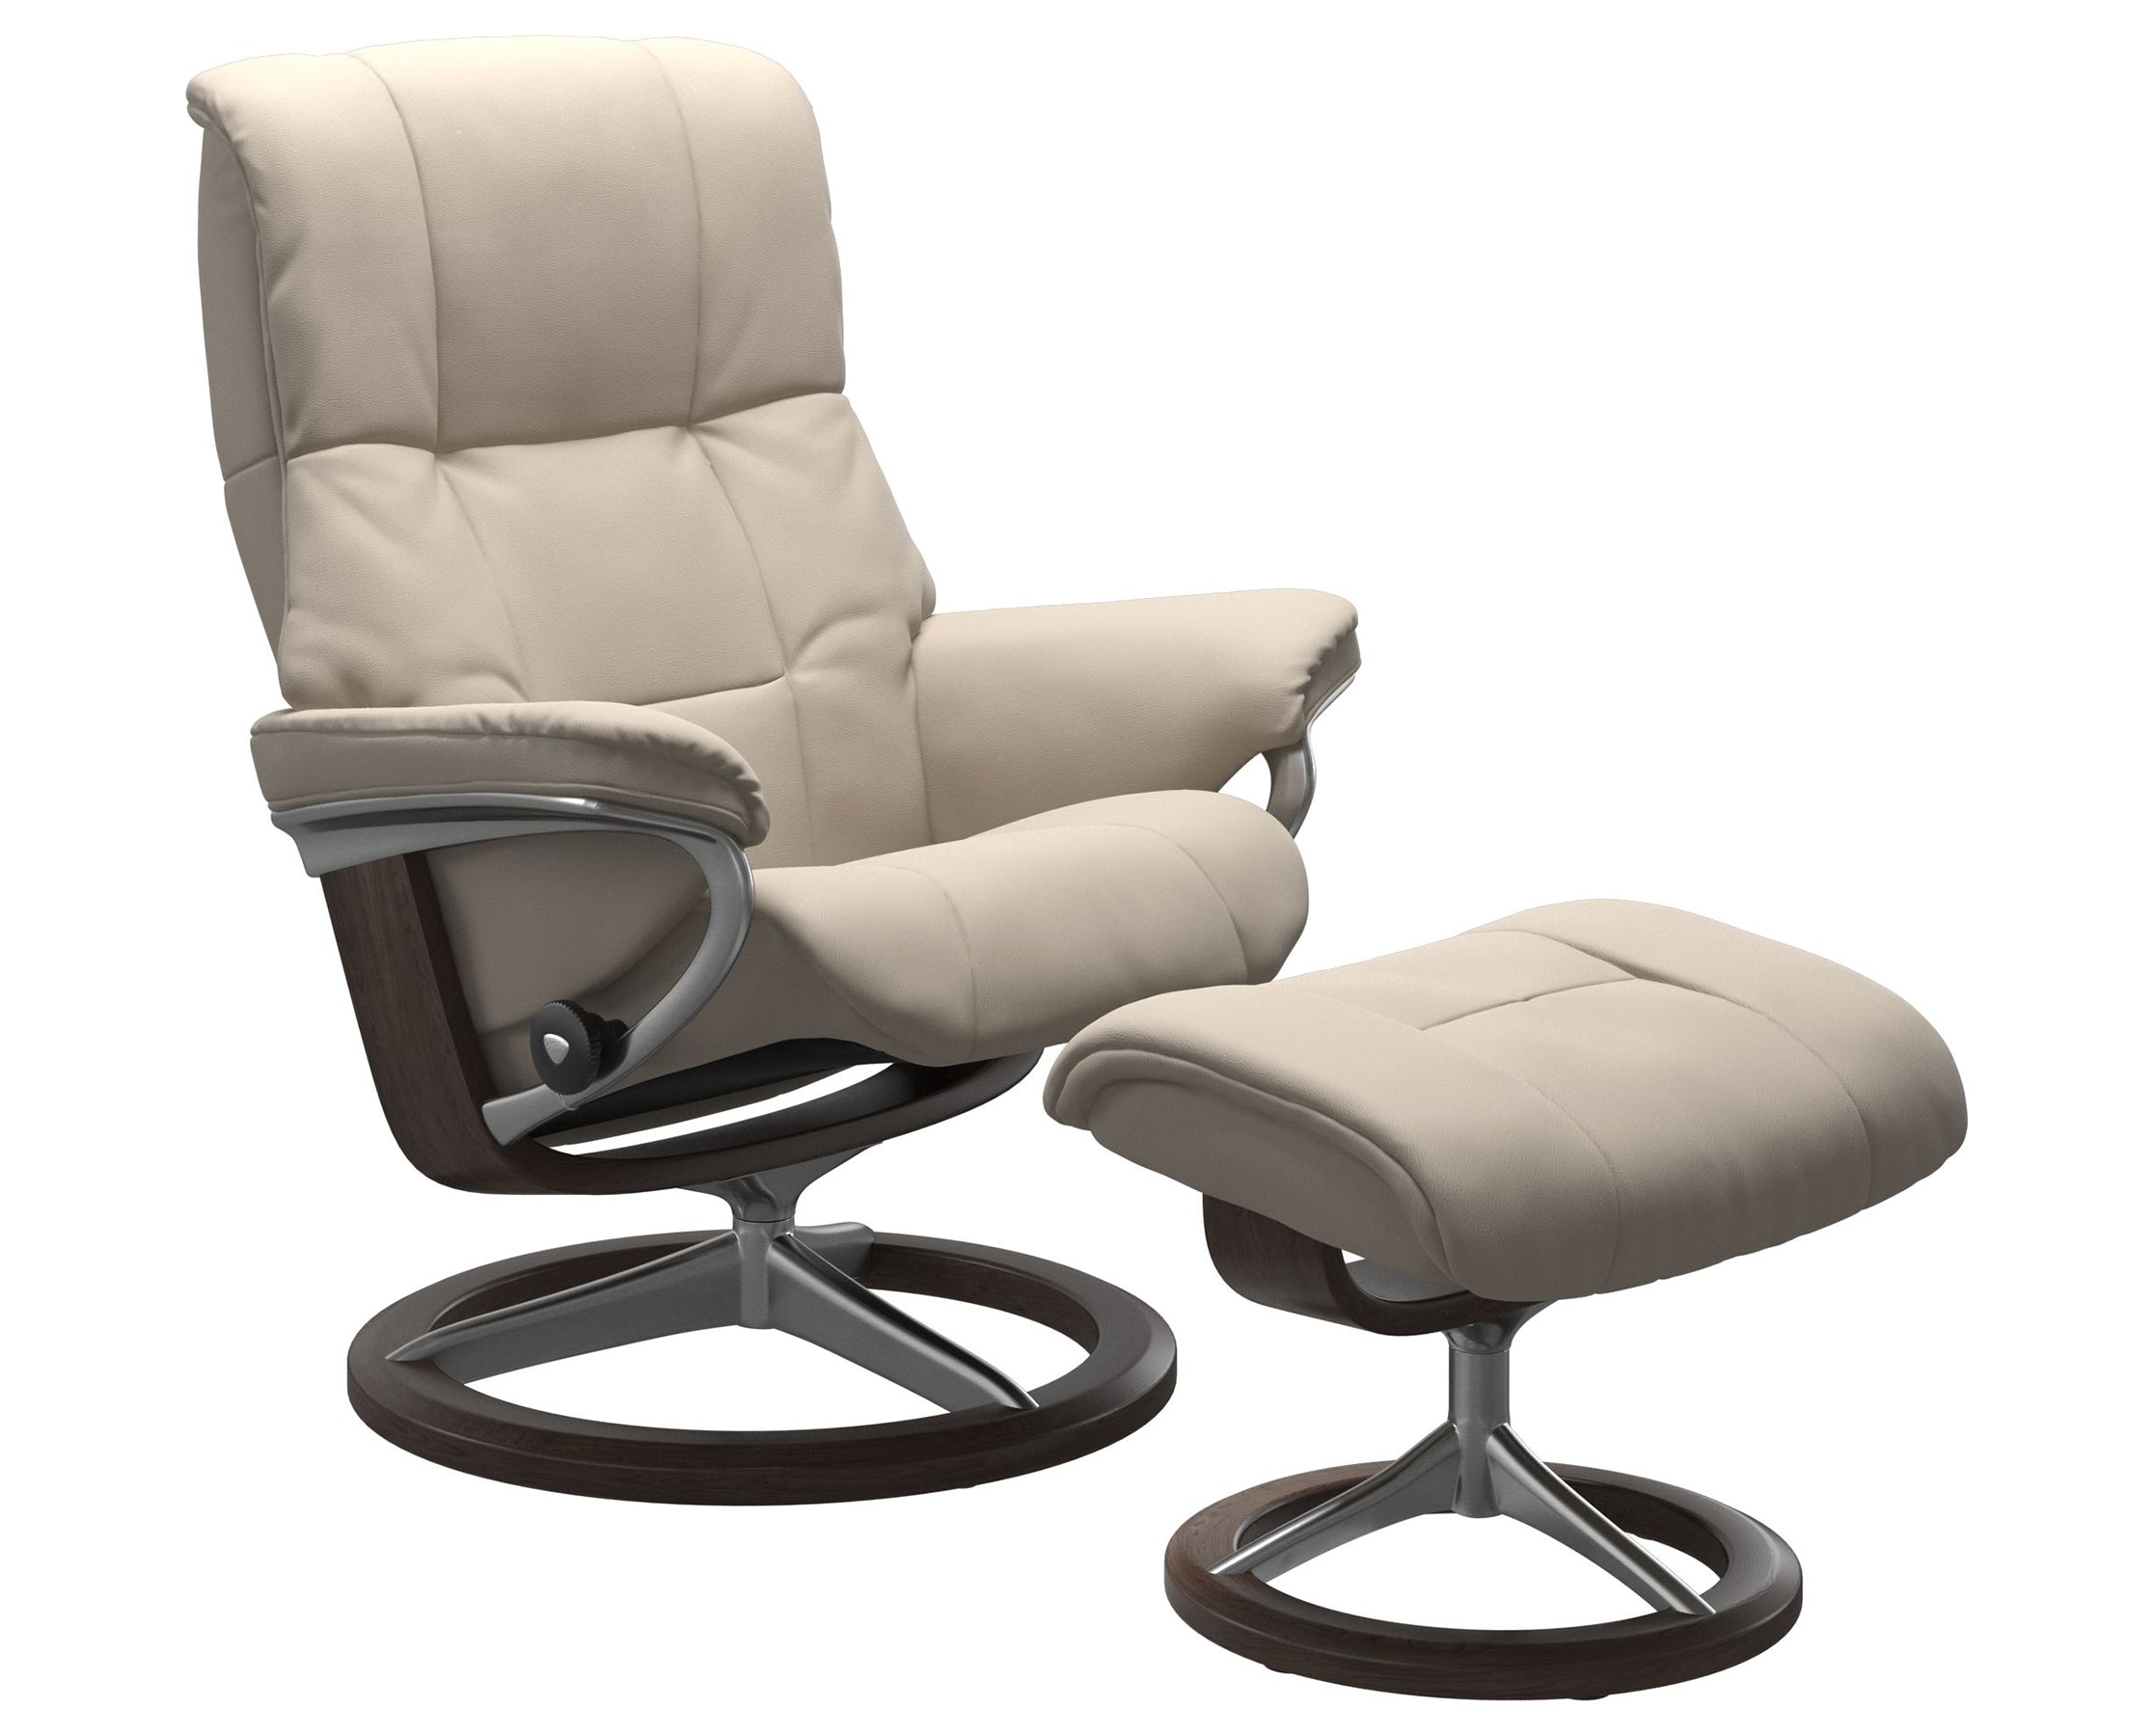 Paloma Leather Fog S/M/L and Wenge Base | Stressless Mayfair Signature Recliner | Valley Ridge Furniture